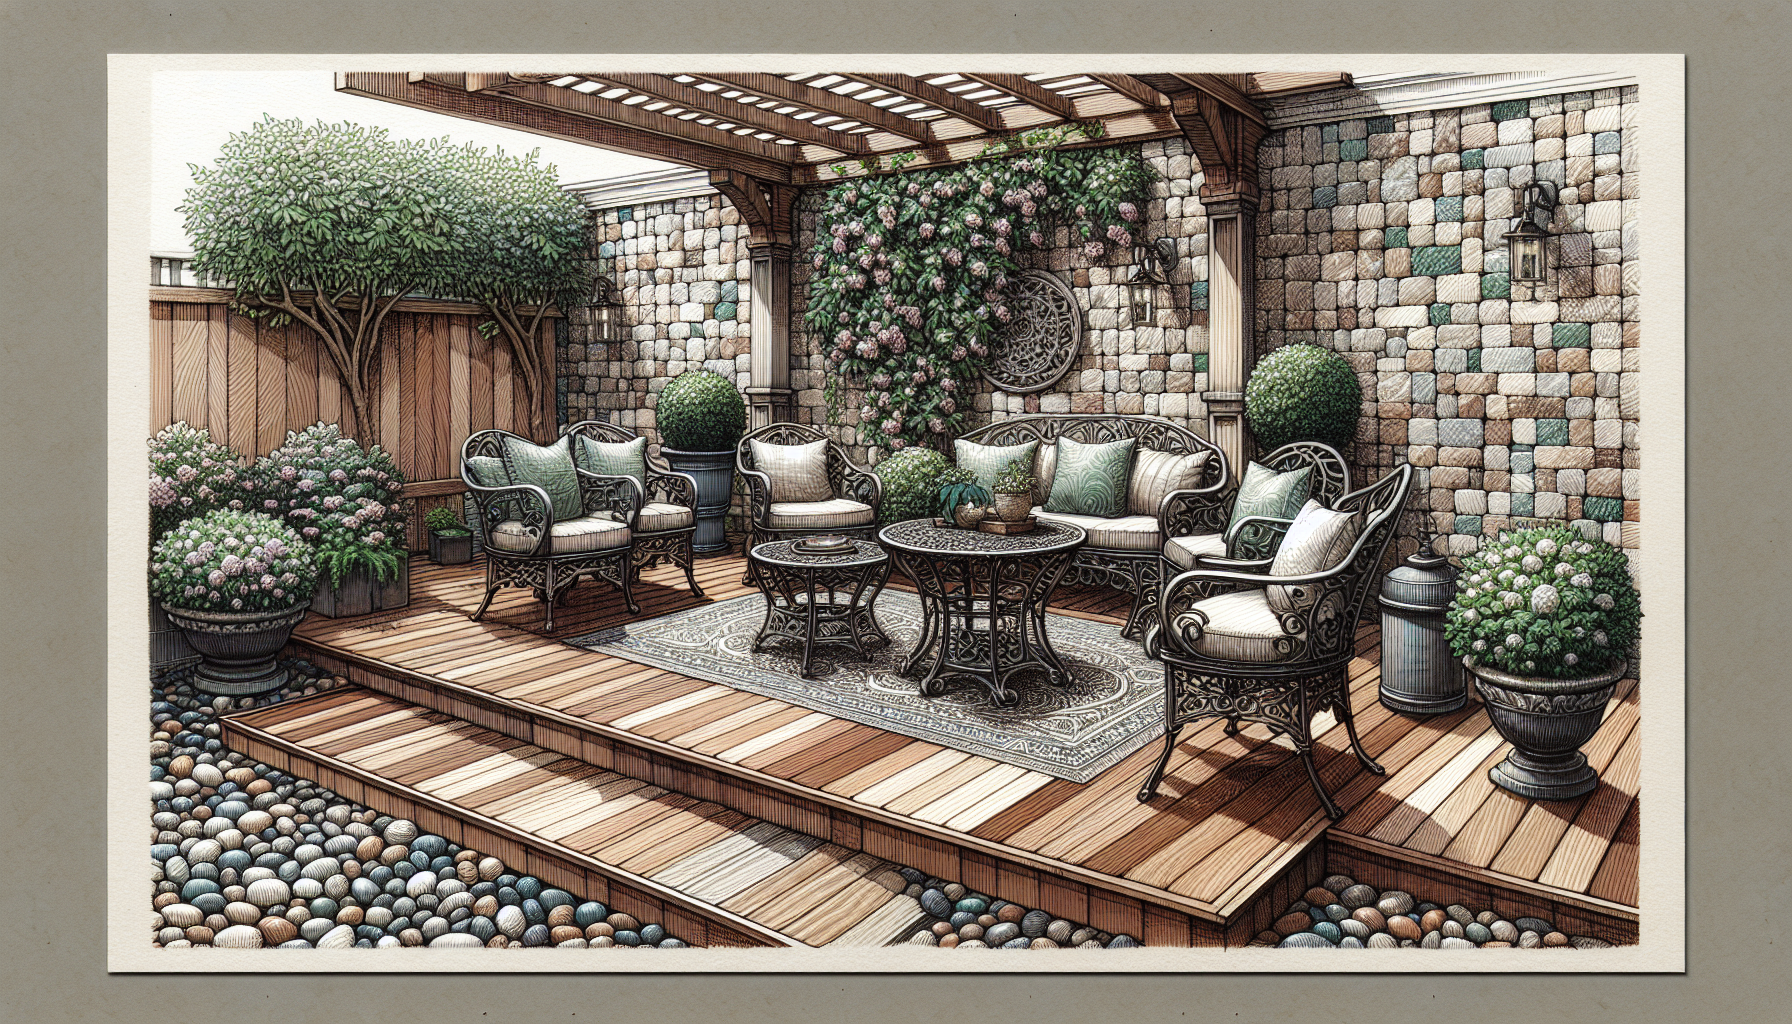 Aesthetic and strong patio design featuring durable materials